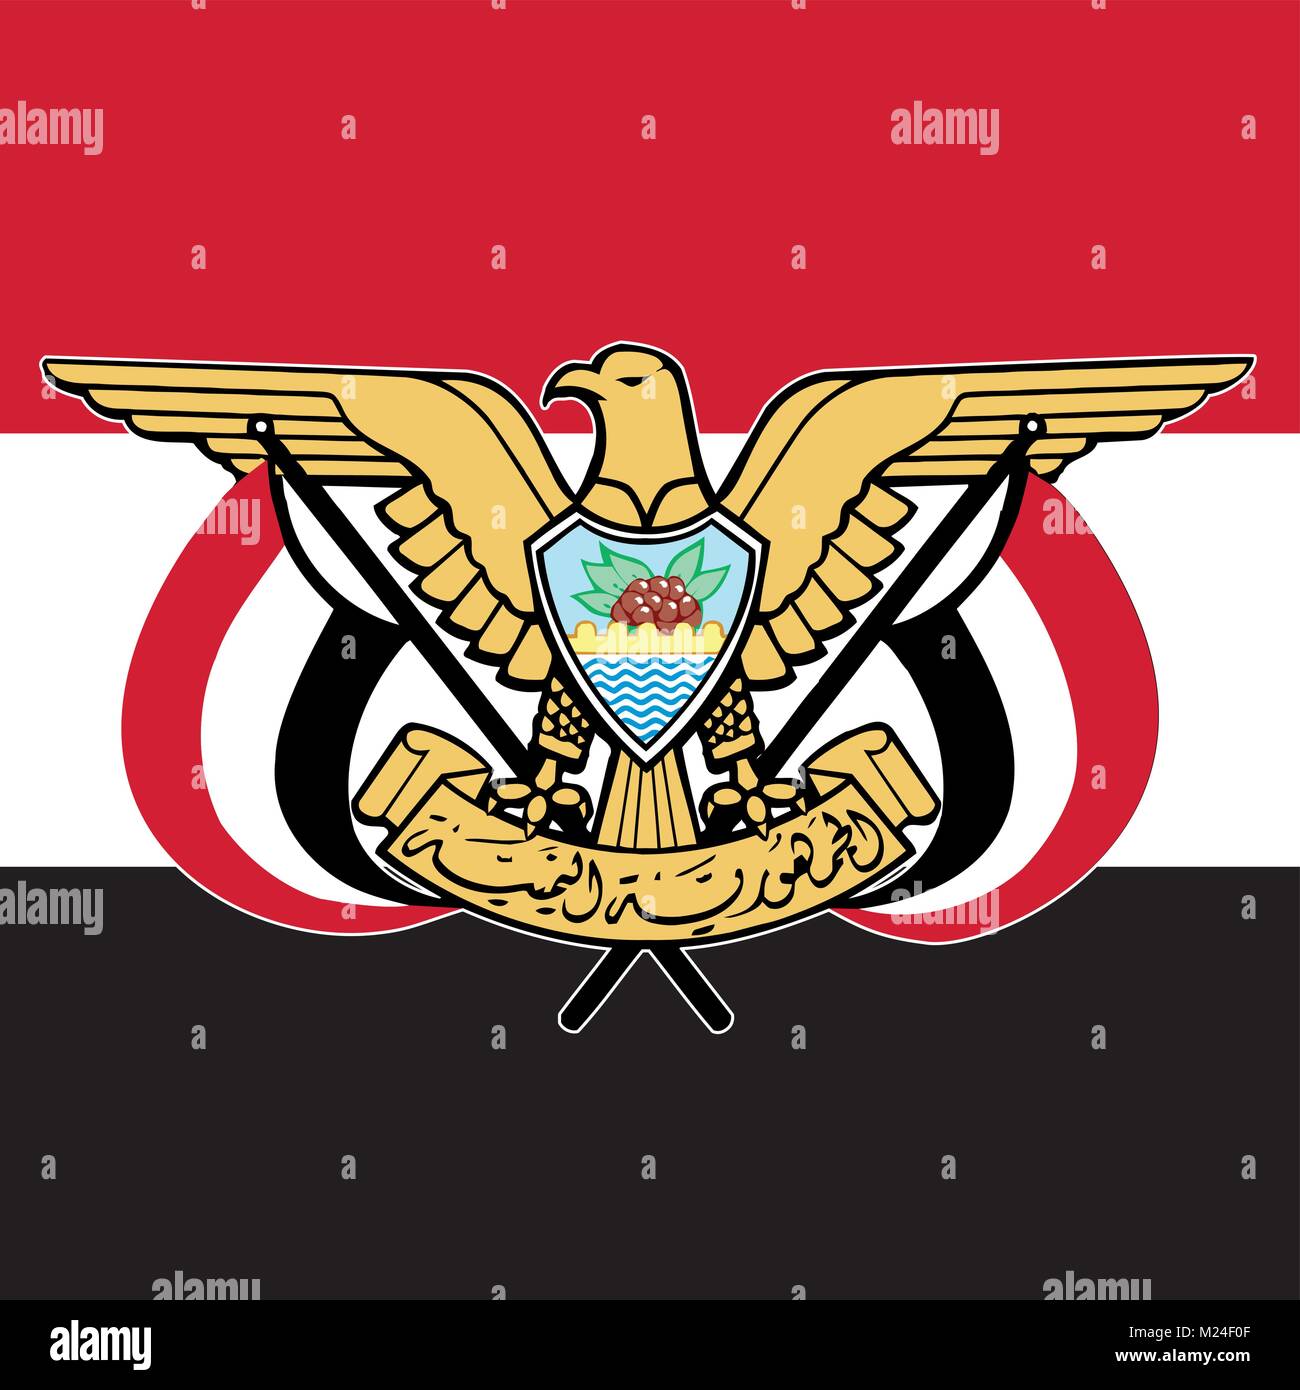 Yemen coat of arms and flag, official symbols of the nation Stock Vector